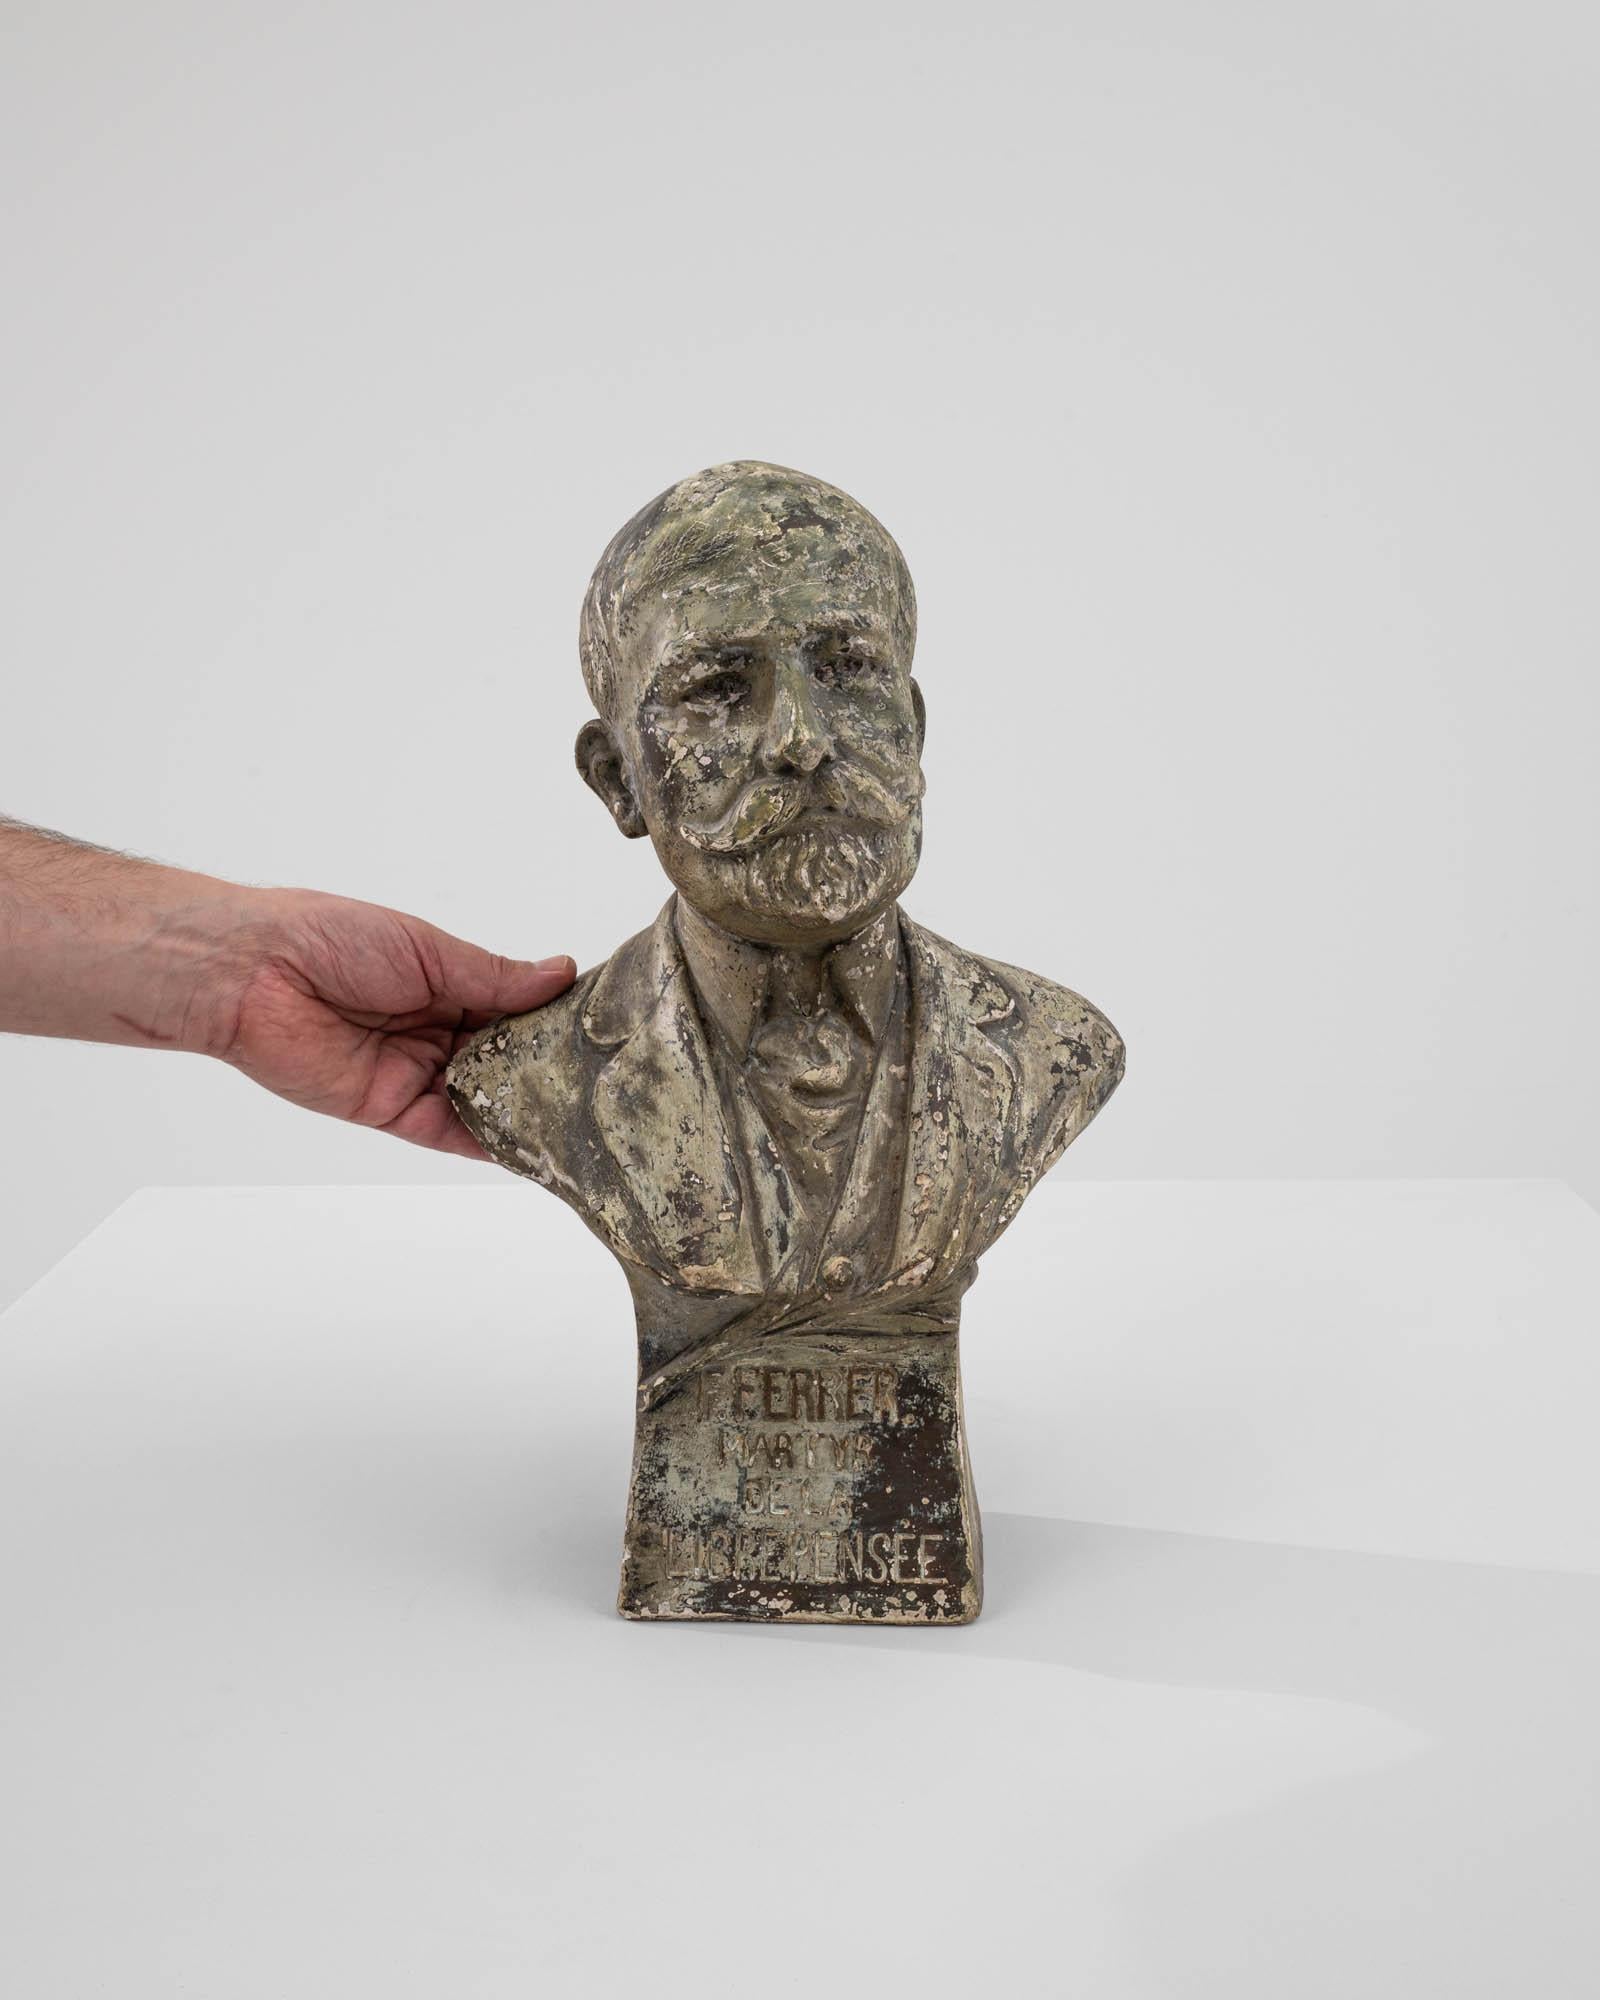 This 1900s French plaster bust offers a unique glimpse into the past, capturing the detailed likeness of an esteemed figure from the early 20th century. Crafted with meticulous care, the bust features a weathered finish that enhances its vintage